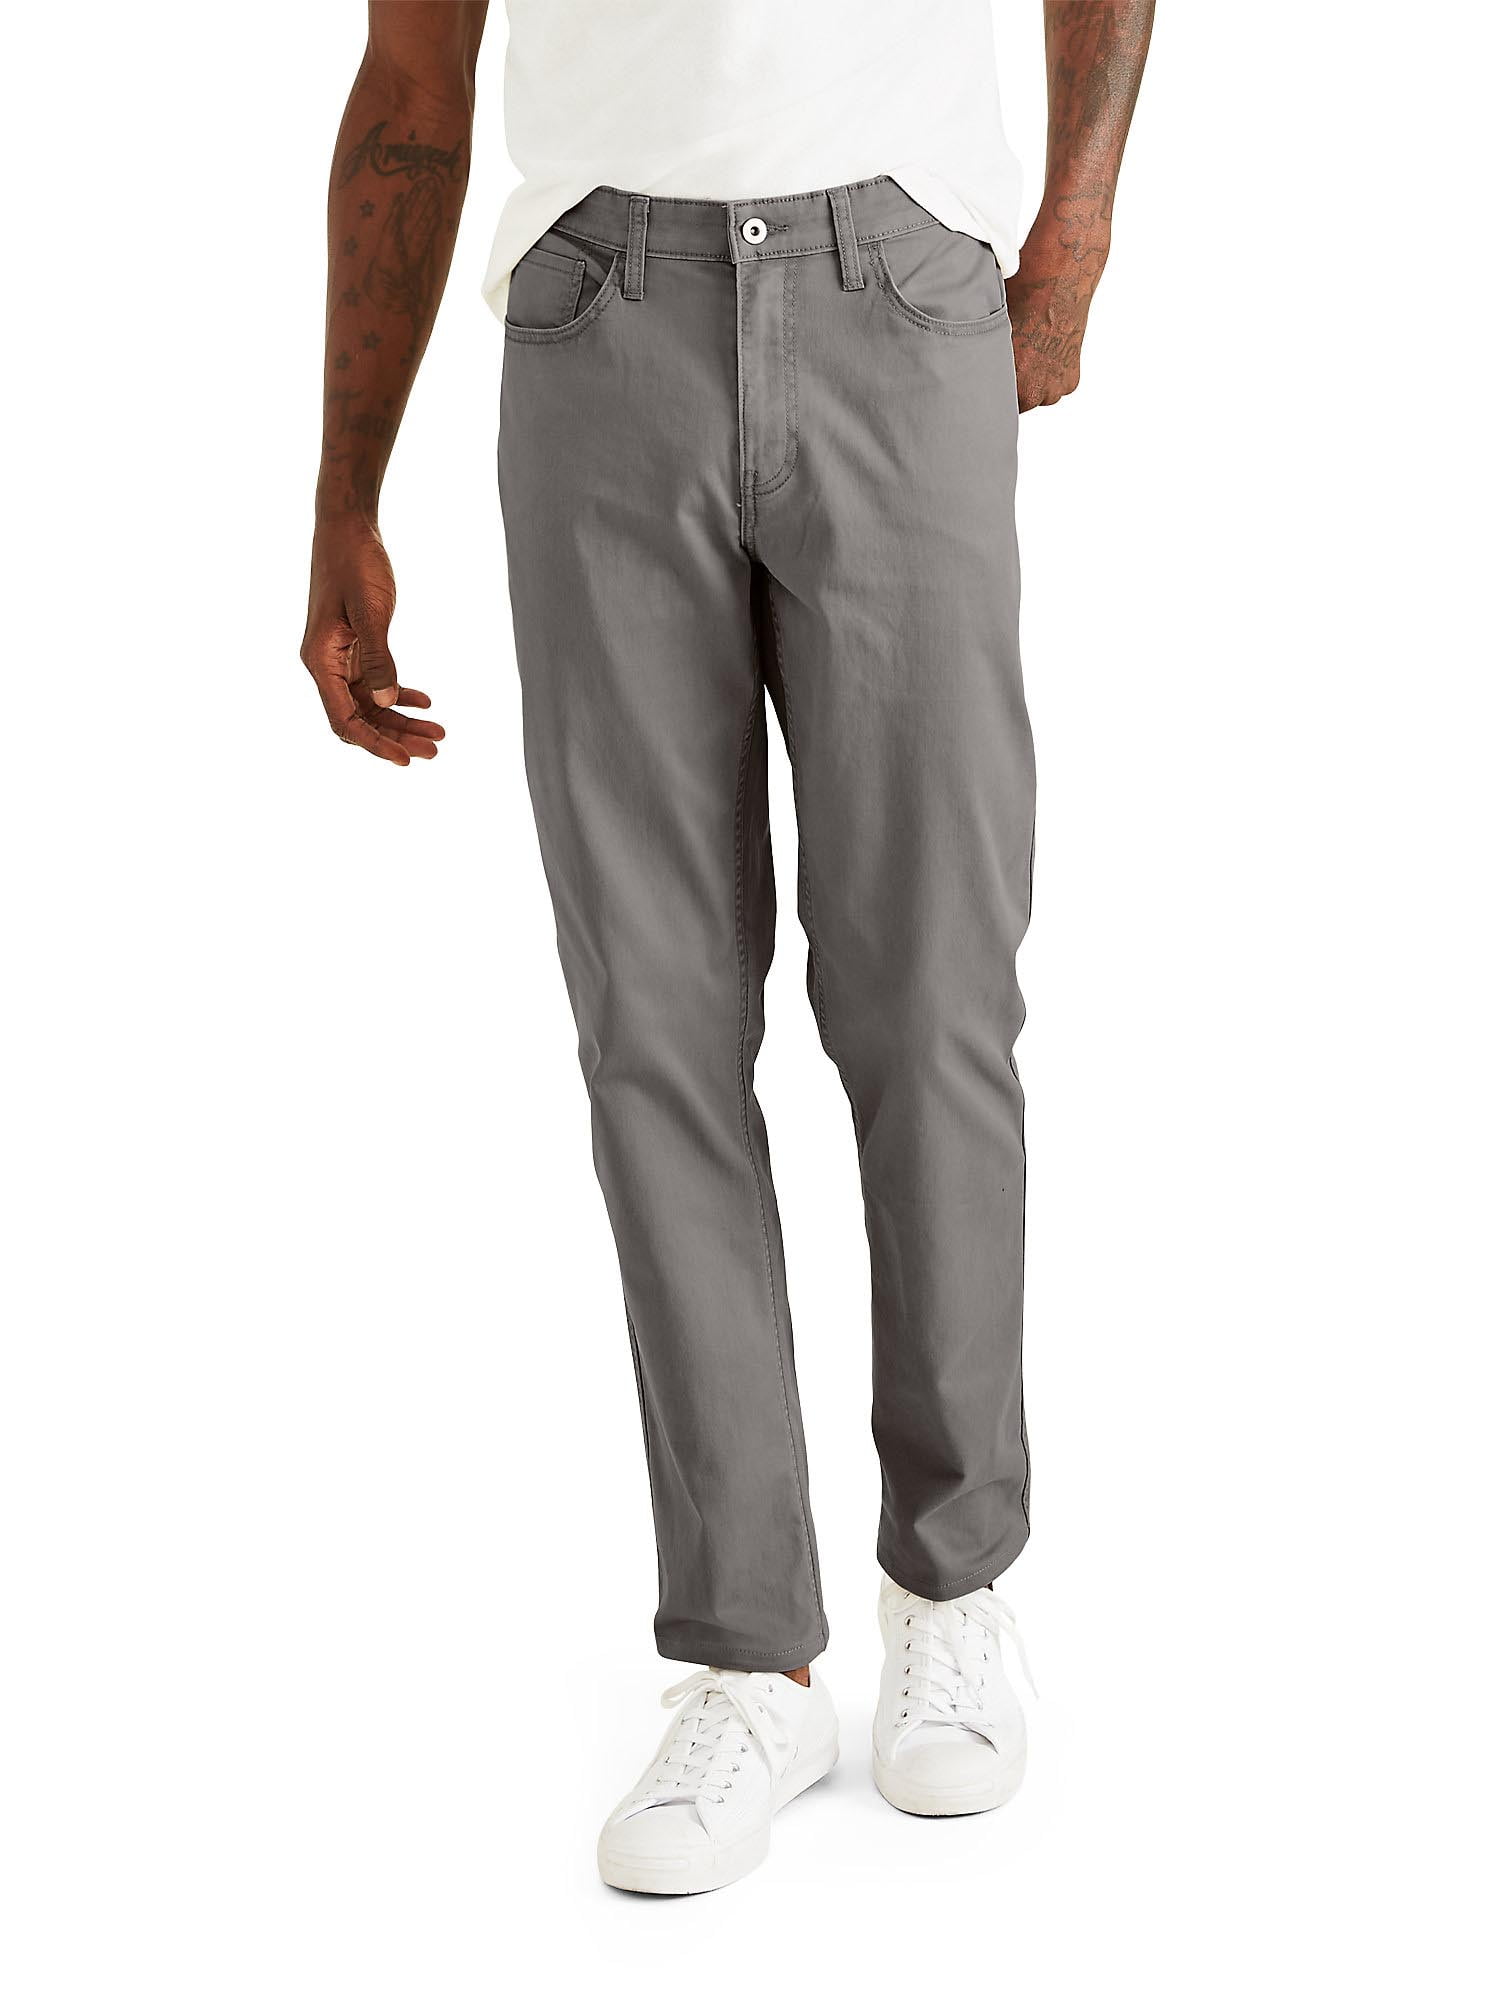 Jean Cut Pants, Straight Fit (Big And Tall) – Dockers®, 52% OFF